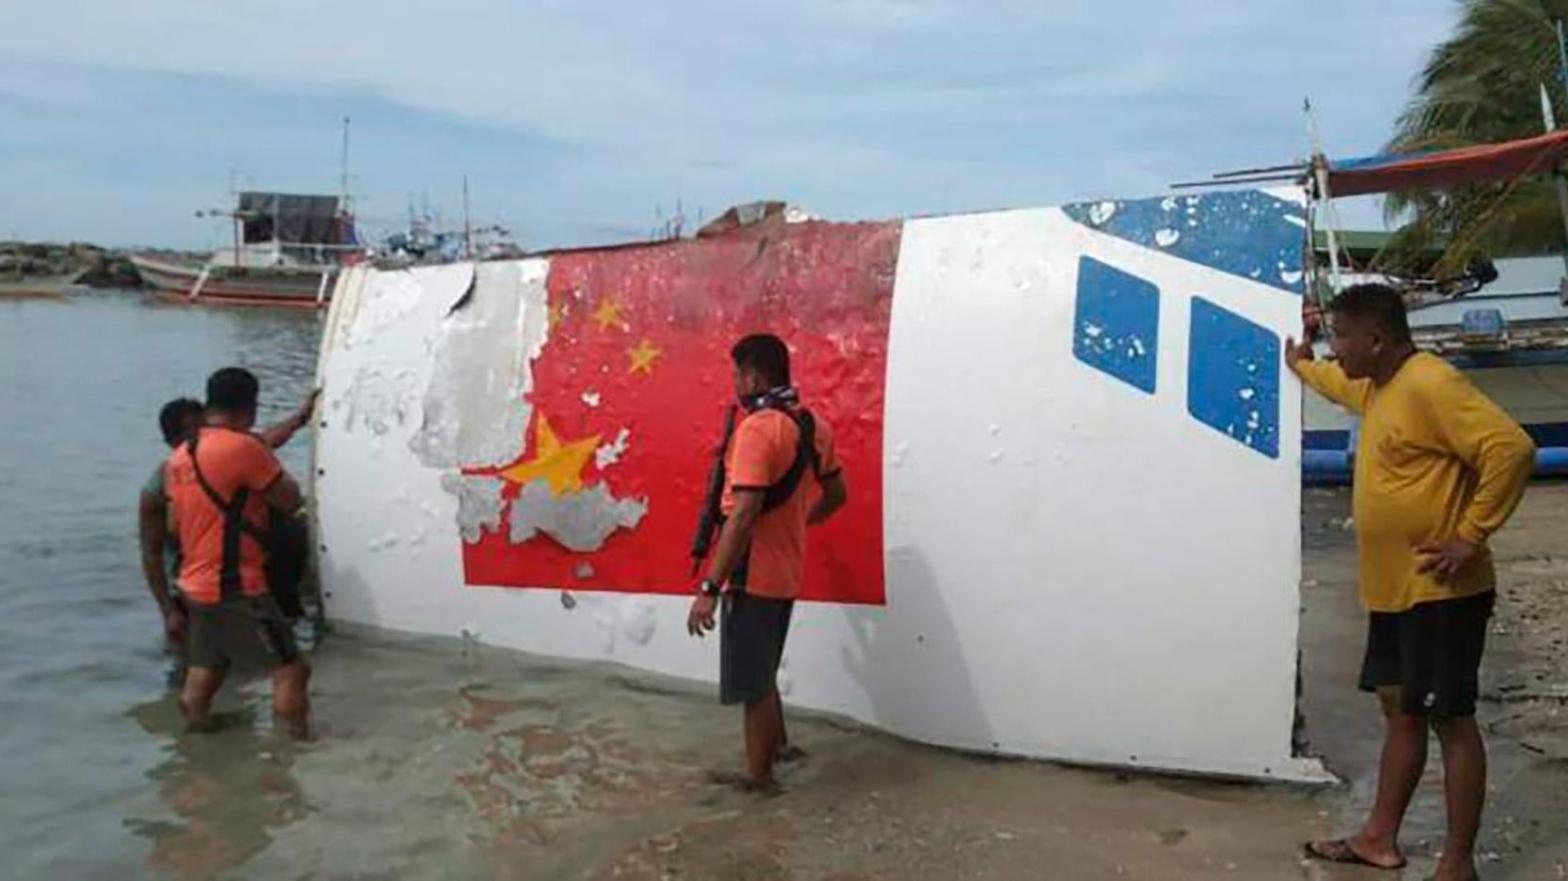 Rescuers recovering debris, which the Philippine Space Agency said has markings of the Long March 5B Chinese rocket that was launched on July 24, after it was found in waters off Mamburao, Occidental Mindoro province, Philippines, on Aug. 2, 2022. (Photo: Philippine Coast Guard, AP)